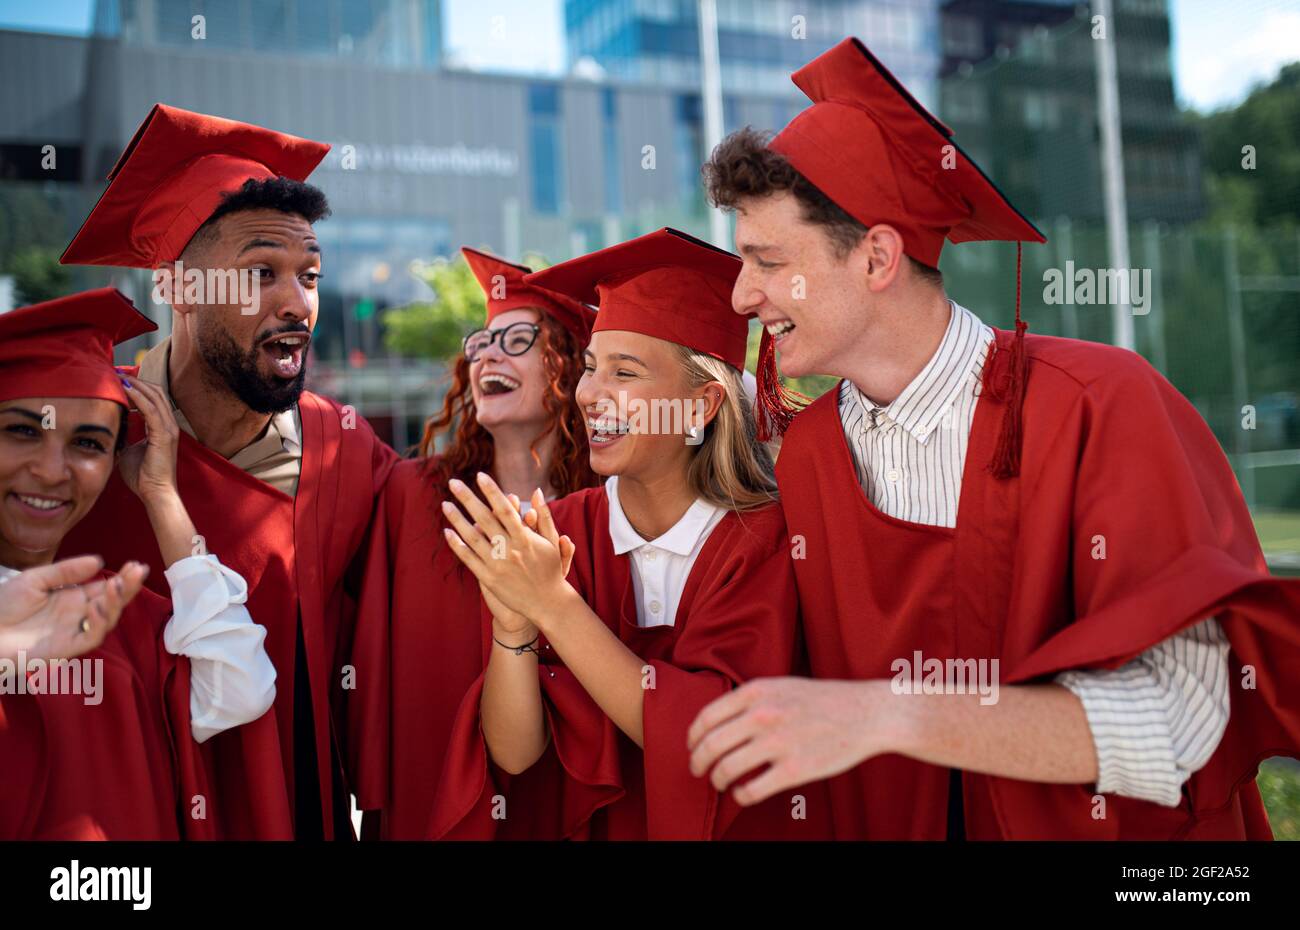 Group of cheerful university students celebrating outdoors, graduation concept. Stock Photo